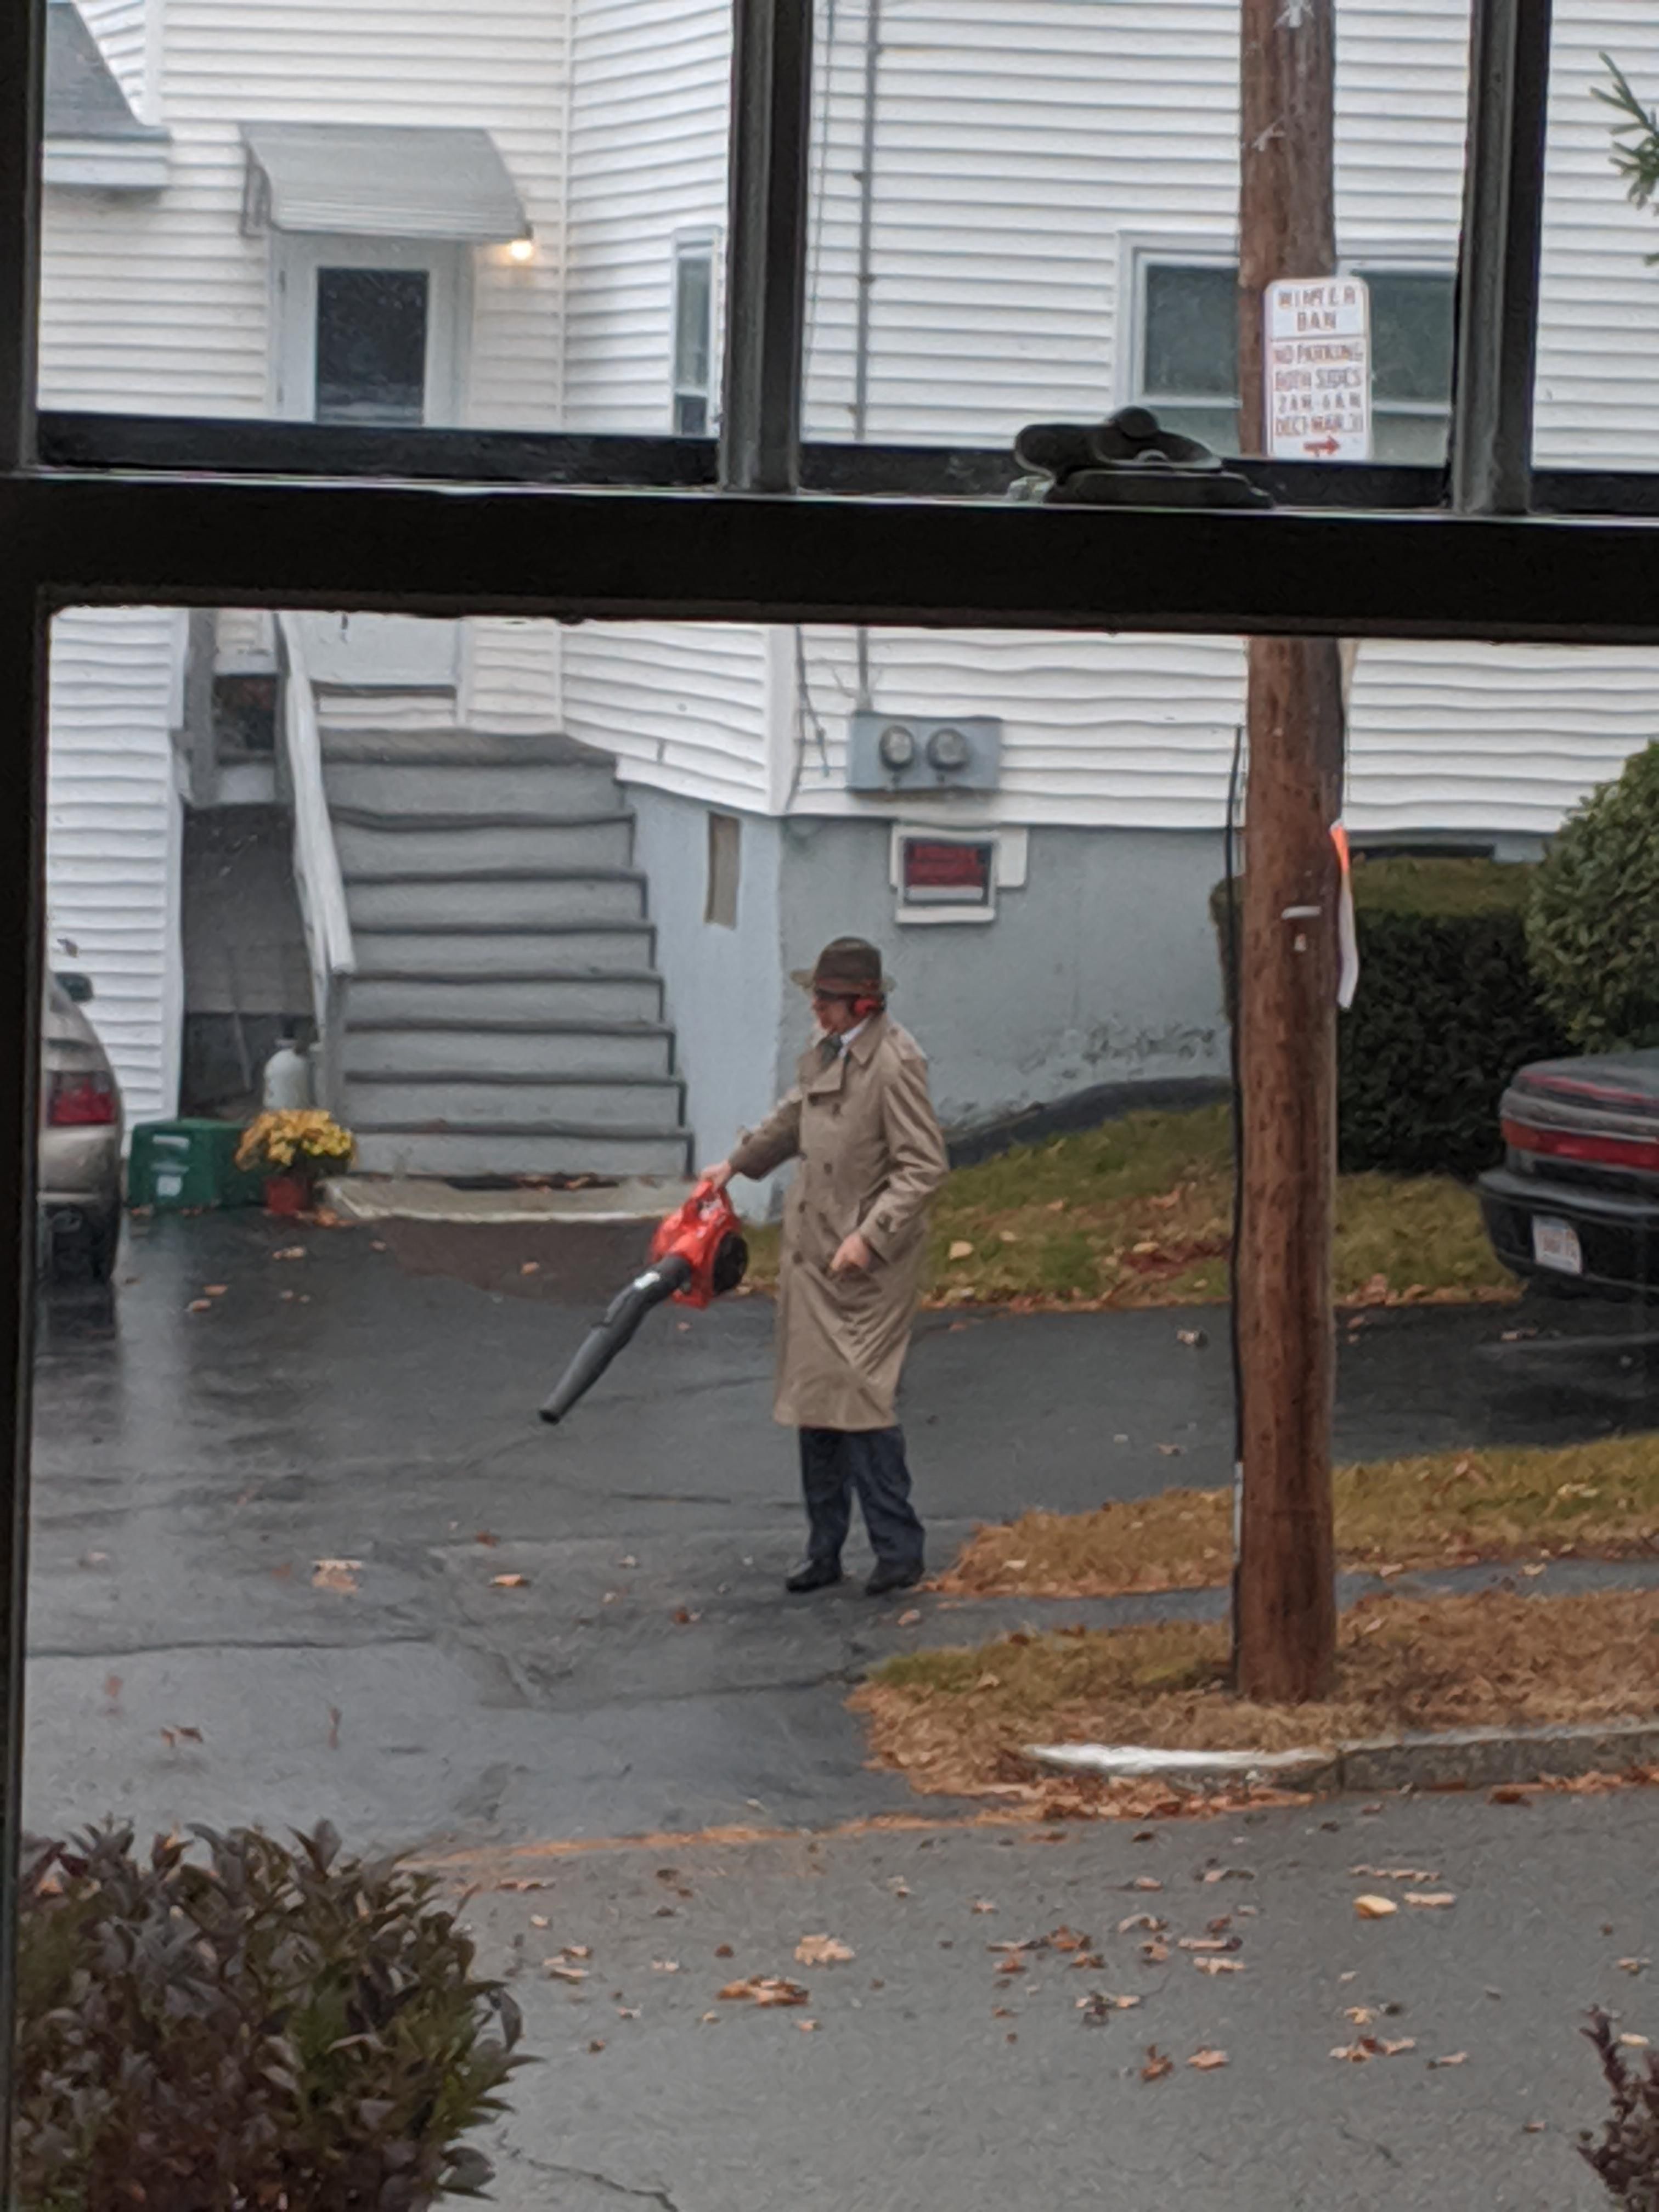 My neighbor is 3 kids in a trench coat